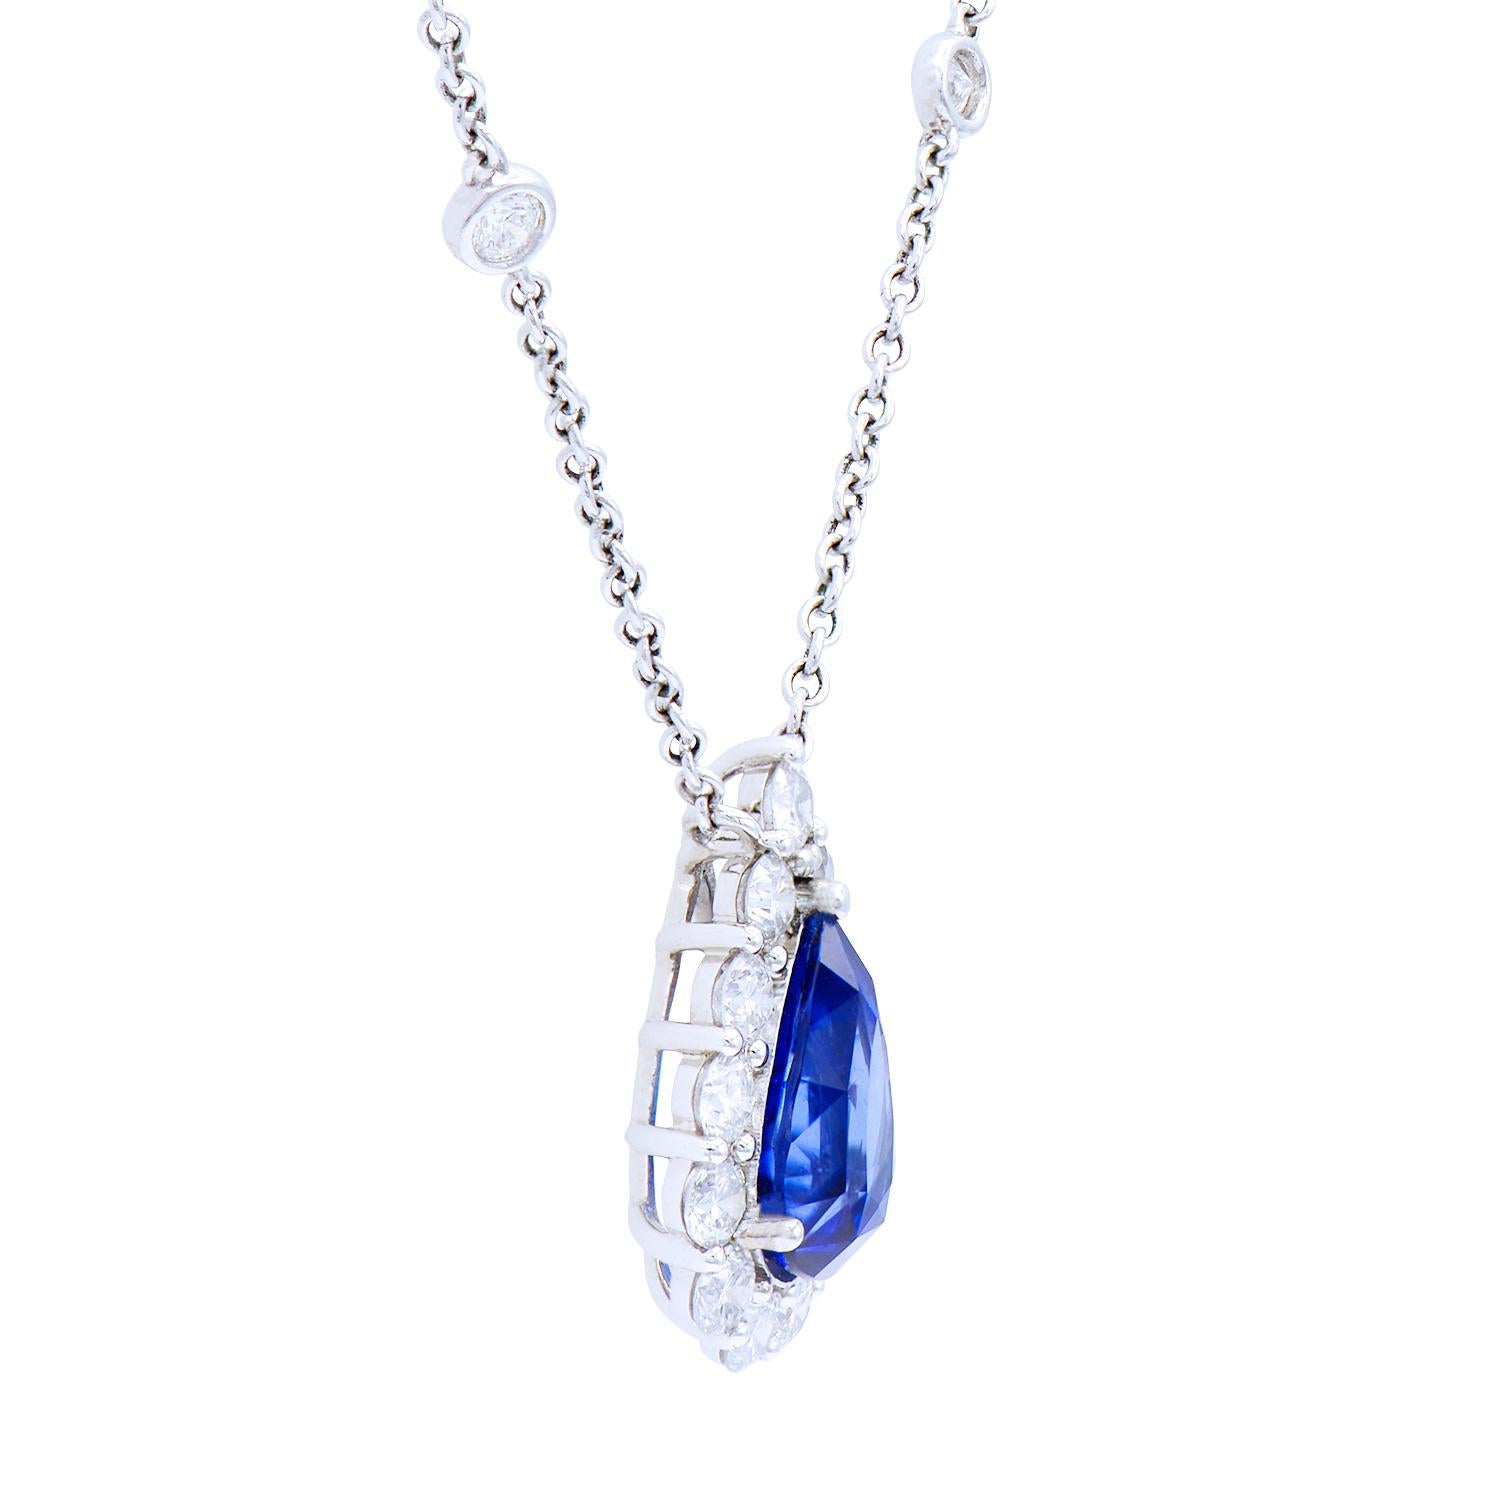 This gorgeous necklace is made from a stunning 4.07 carat blue drop or pear shaped sapphire, which is circled by a beautiful diamond halo made from 13 round VS2, G color diamonds totaling 1.35 carats. They are all set in 6.3 grams of 18 karat white